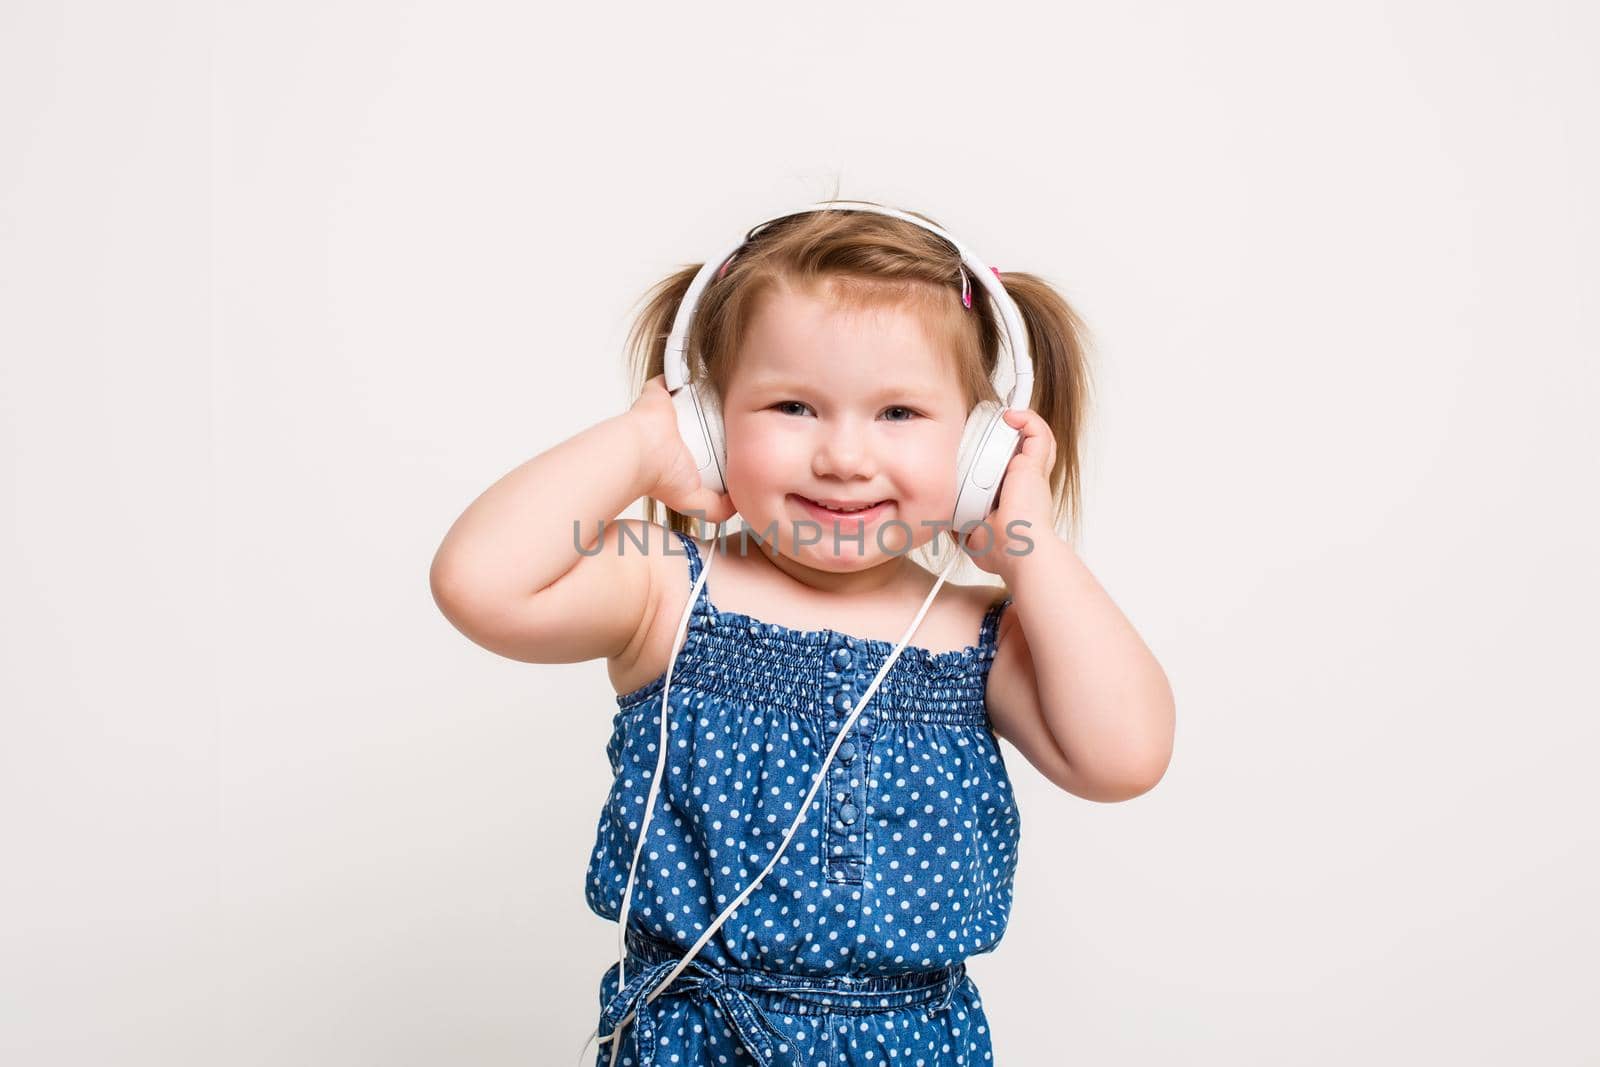 Cute little girl in headphones listening to music using a tablet and smiling on white background. A child looks at the camera